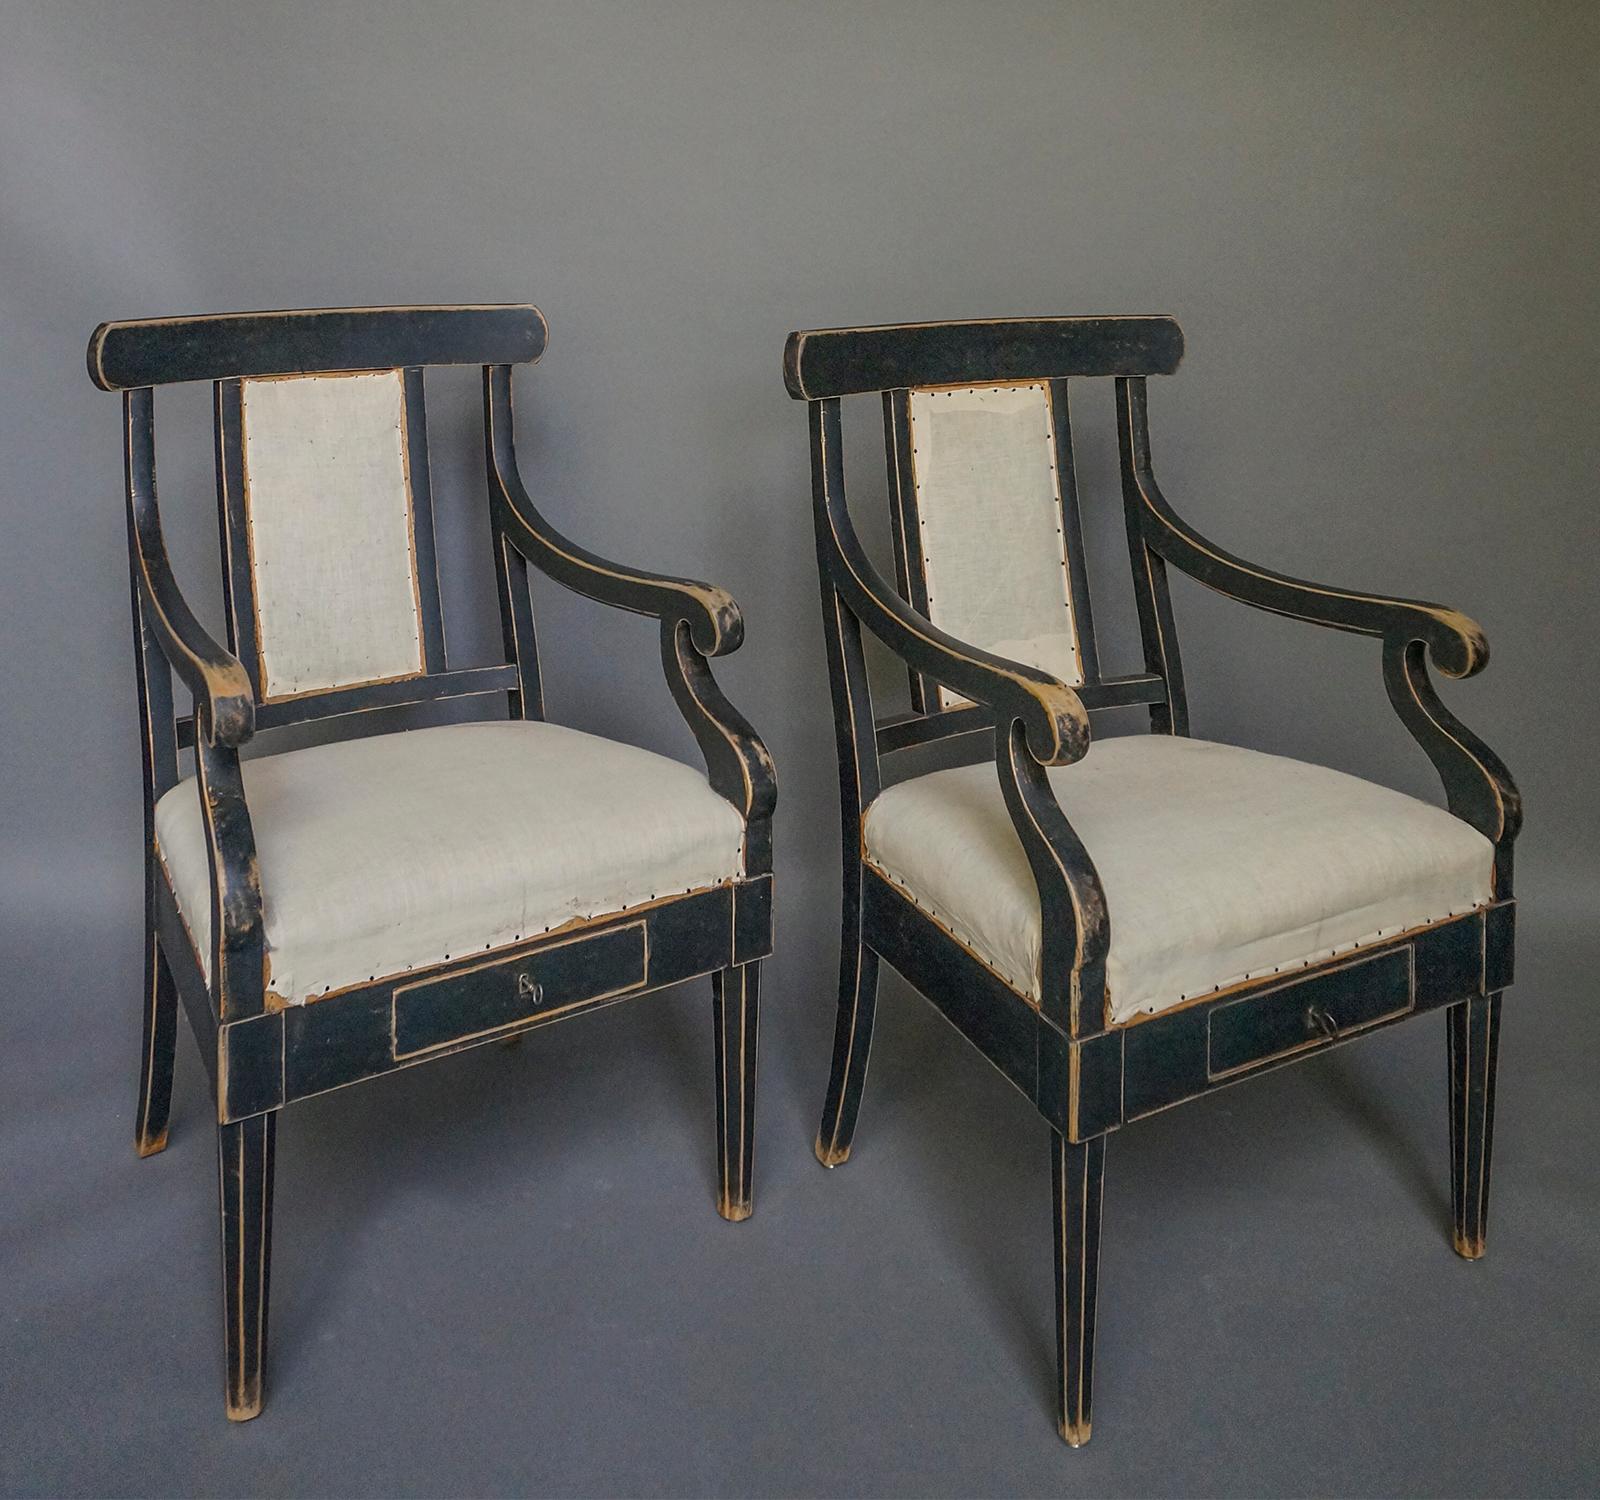 Pair of rare Swedish armchairs, circa 1840, with a locking drawer in the front apron. Upholstered seat and back, curving armrests and hexagonal front legs. Found in a courtroom.